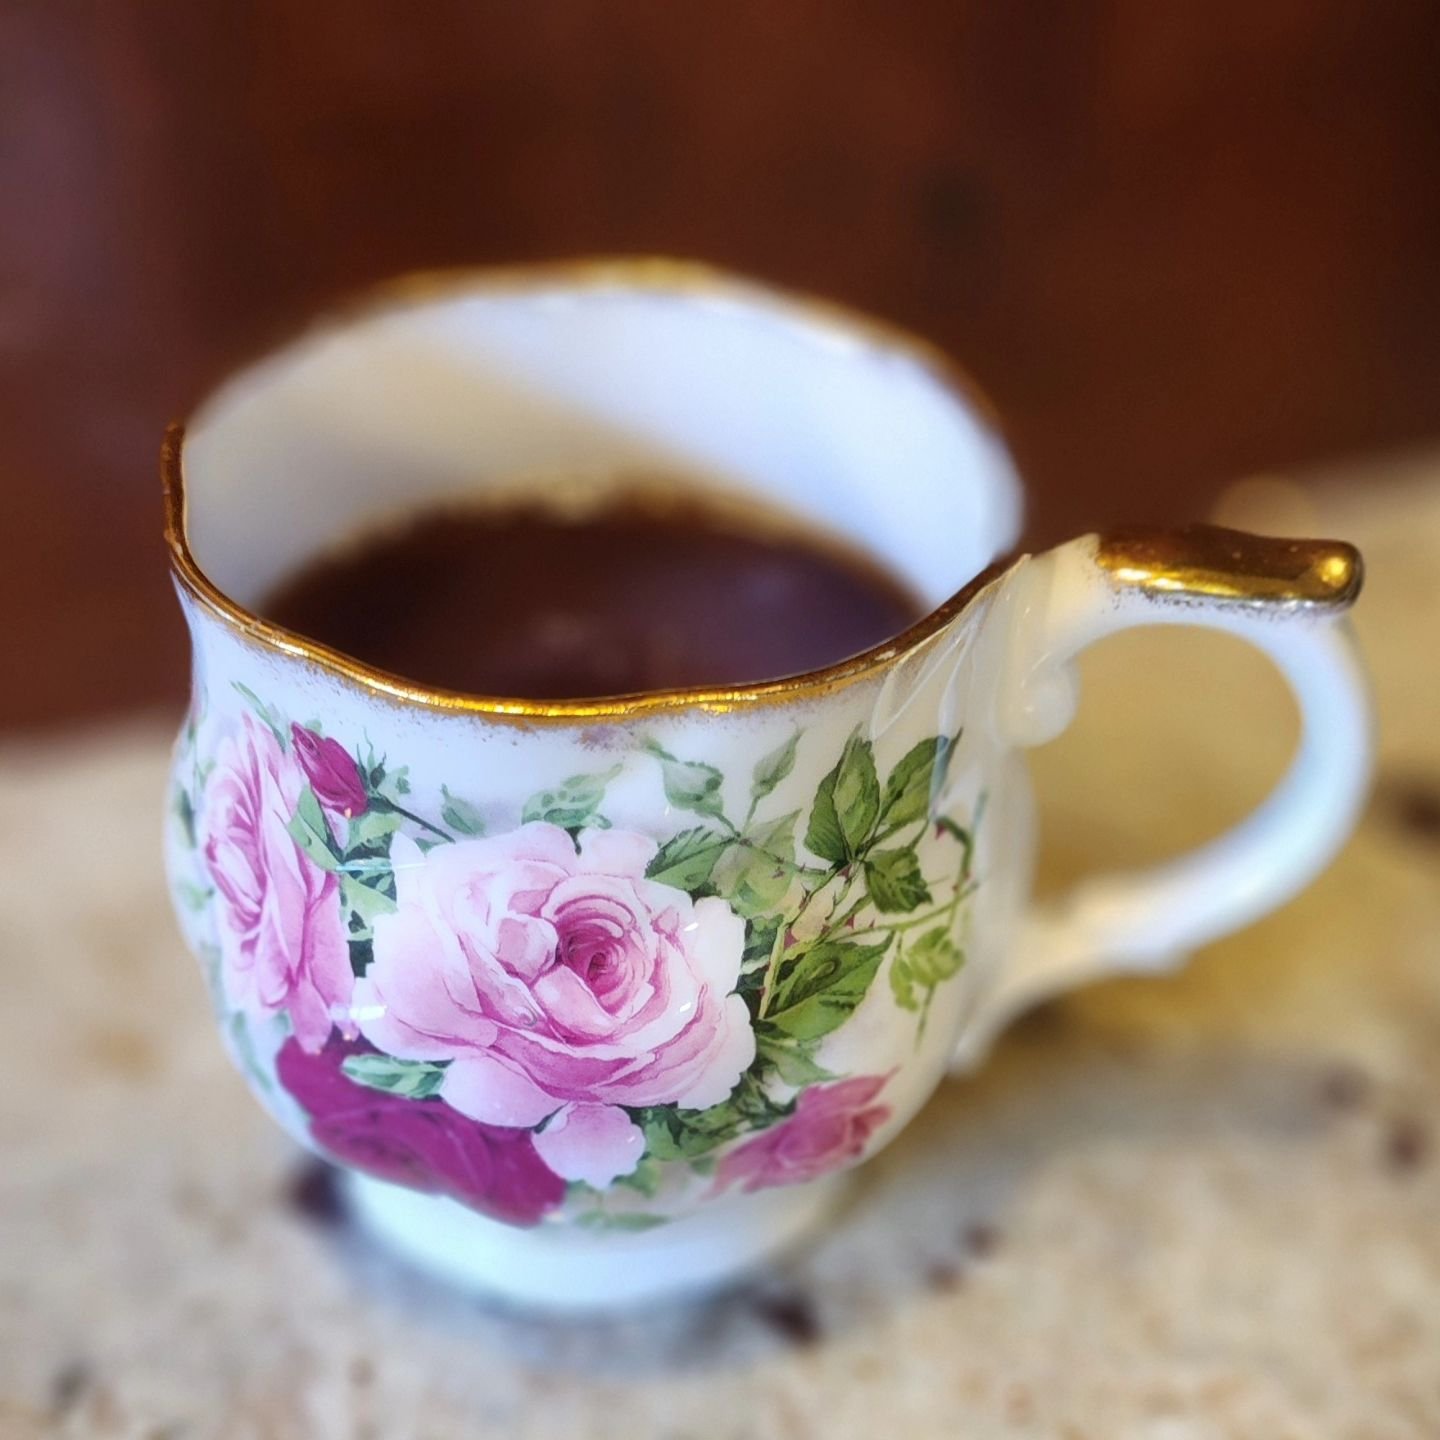 In honor of British National Tea Day,  we are drinking our British Breakfast tea with scones! Cheers! 🫖 ☕️ 

#nationalteaday #teatimemagazine #teatime #teablends #uniqueblacktea #mcminnvilleoregon #willamettevalley #shopsmall #shoplocal